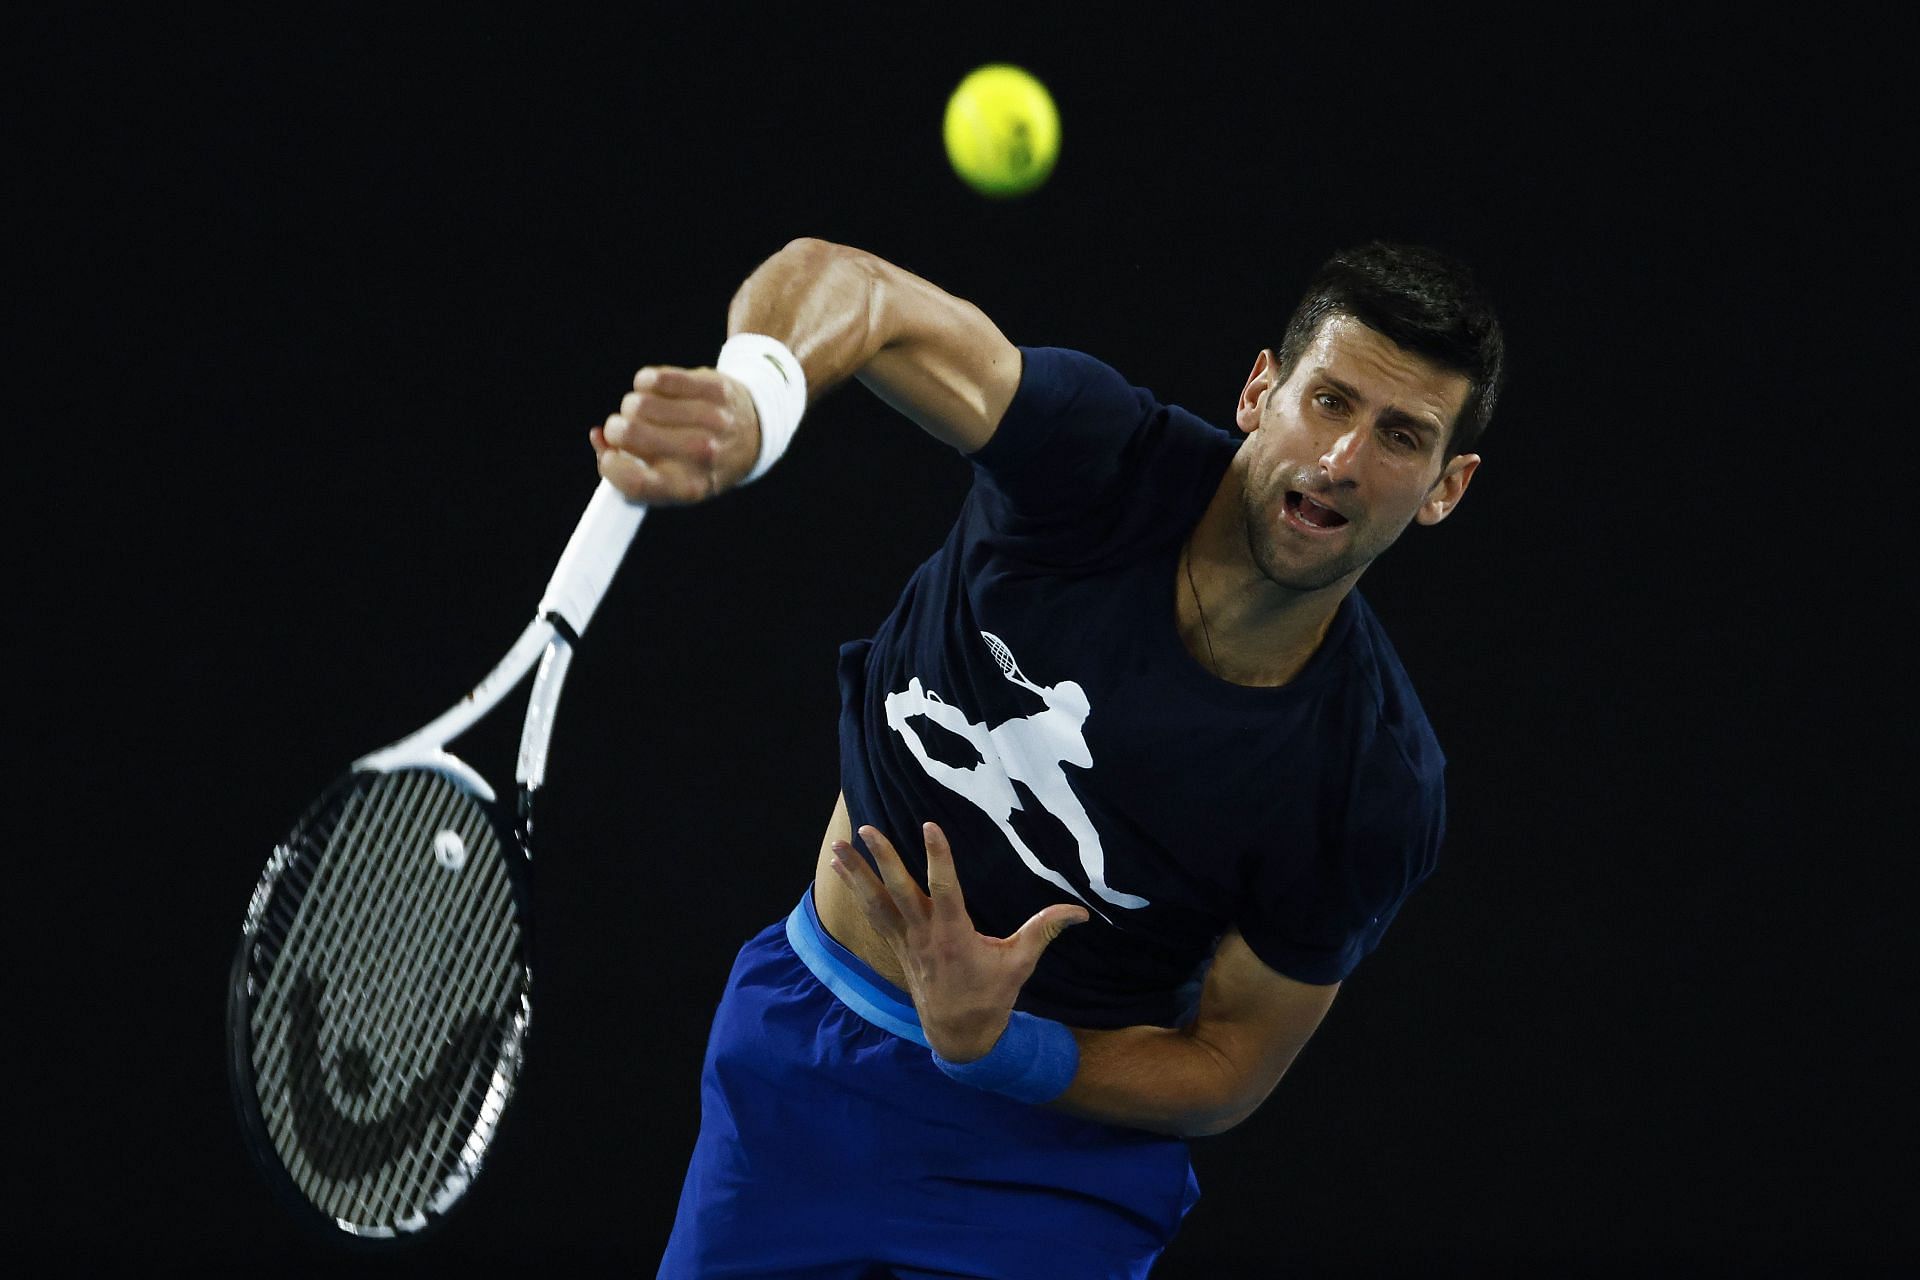 Novak Djokovic at a practice session ahead of the 2022 Australian Open